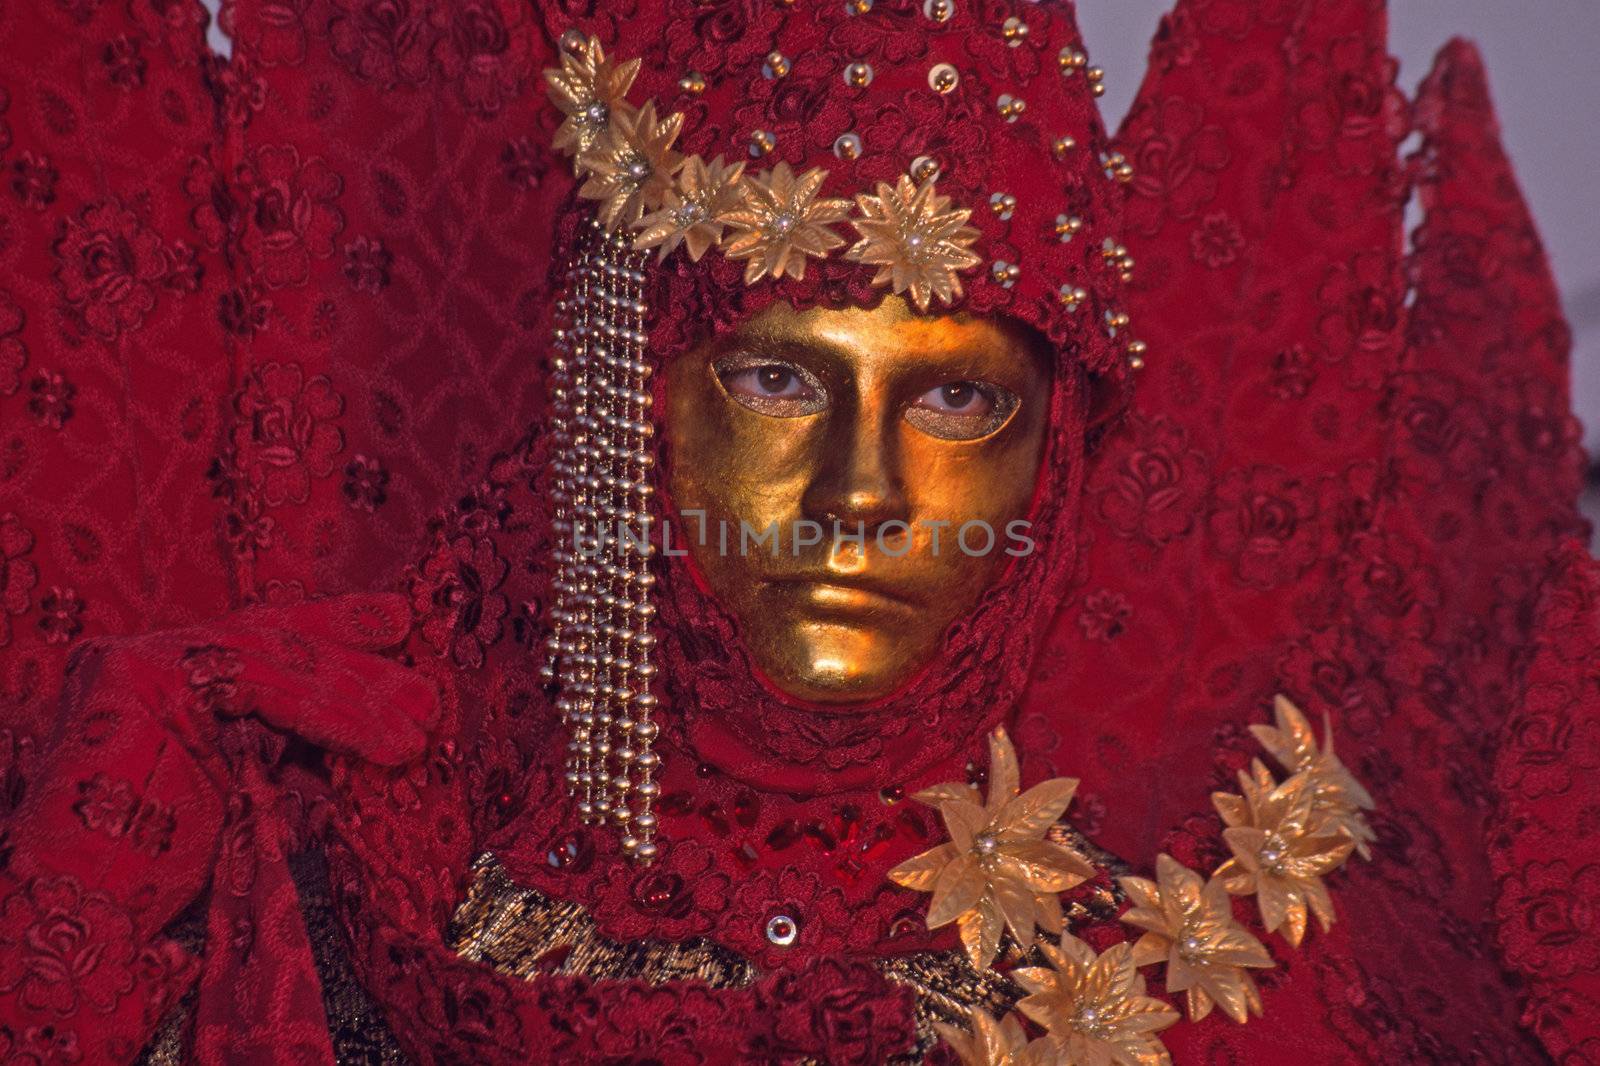 Carnival in Venice, Mask 111b by Natureandmore